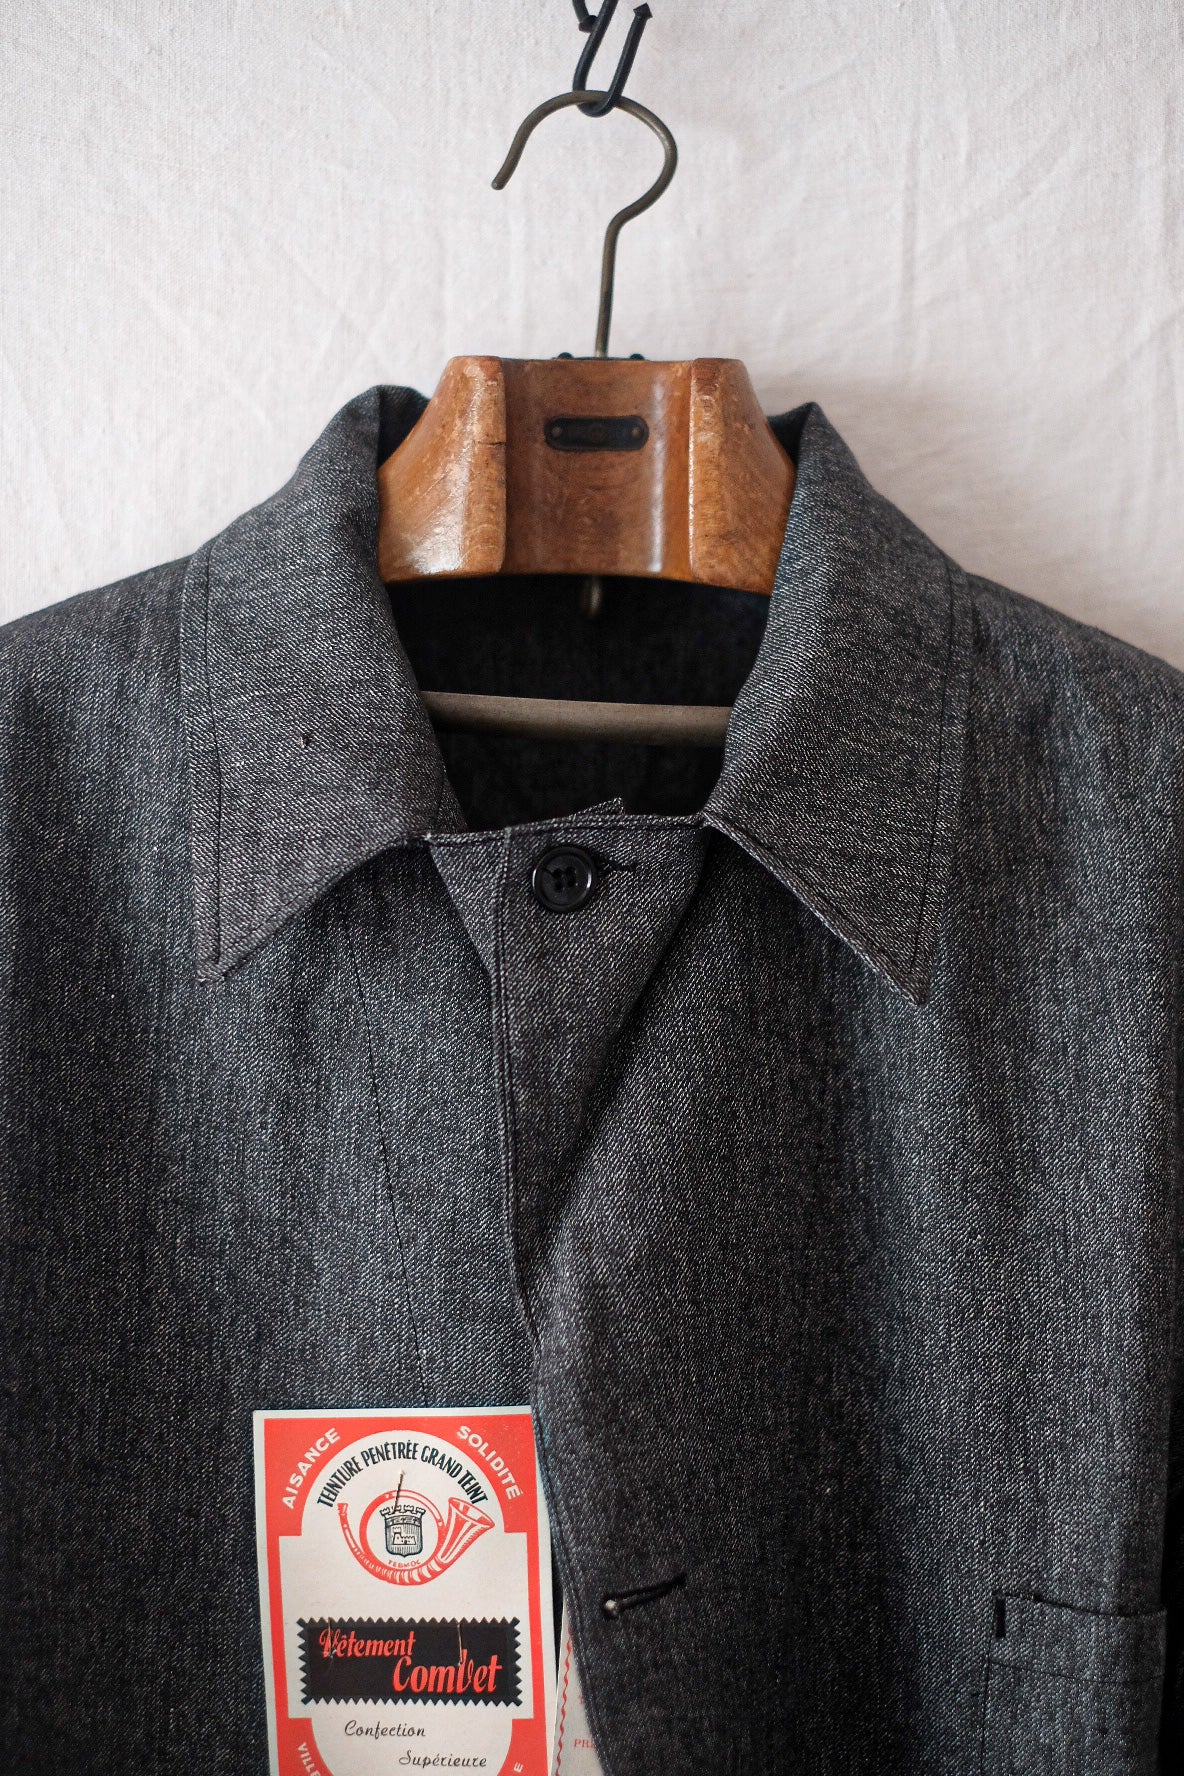 【~50's】French Vintage Black Chambray Atelier Coat “Dead Stock”